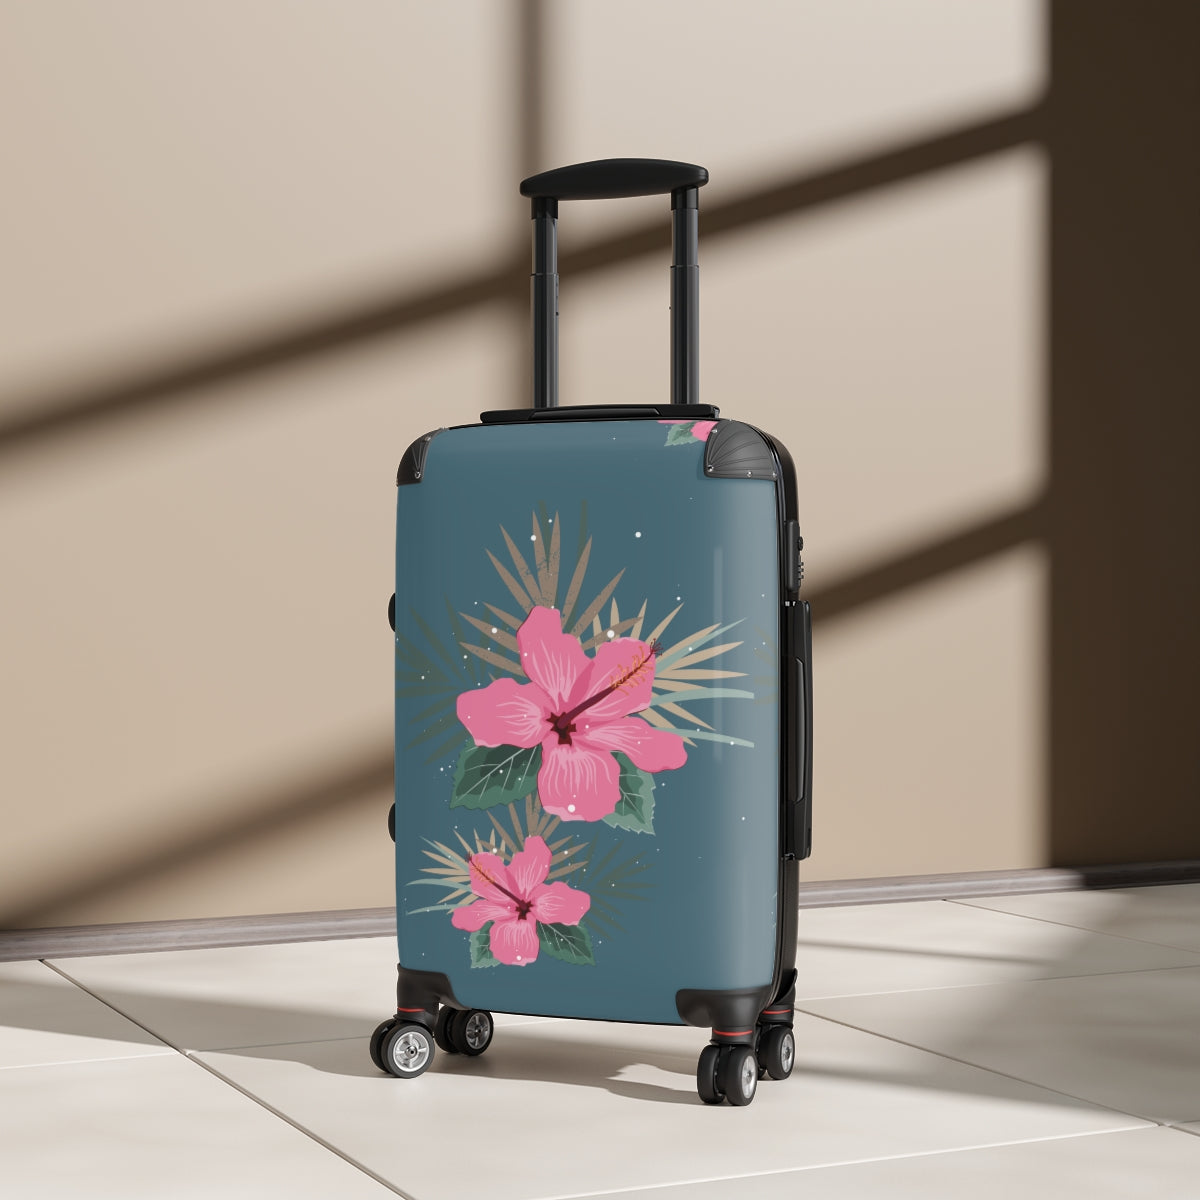 PINK FLORAL SUITCASE Set Artzira, Cabin Suitcase Carry-on Luggage, Trolly Travel Bags Double Wheeled Spinners, Women's Choice